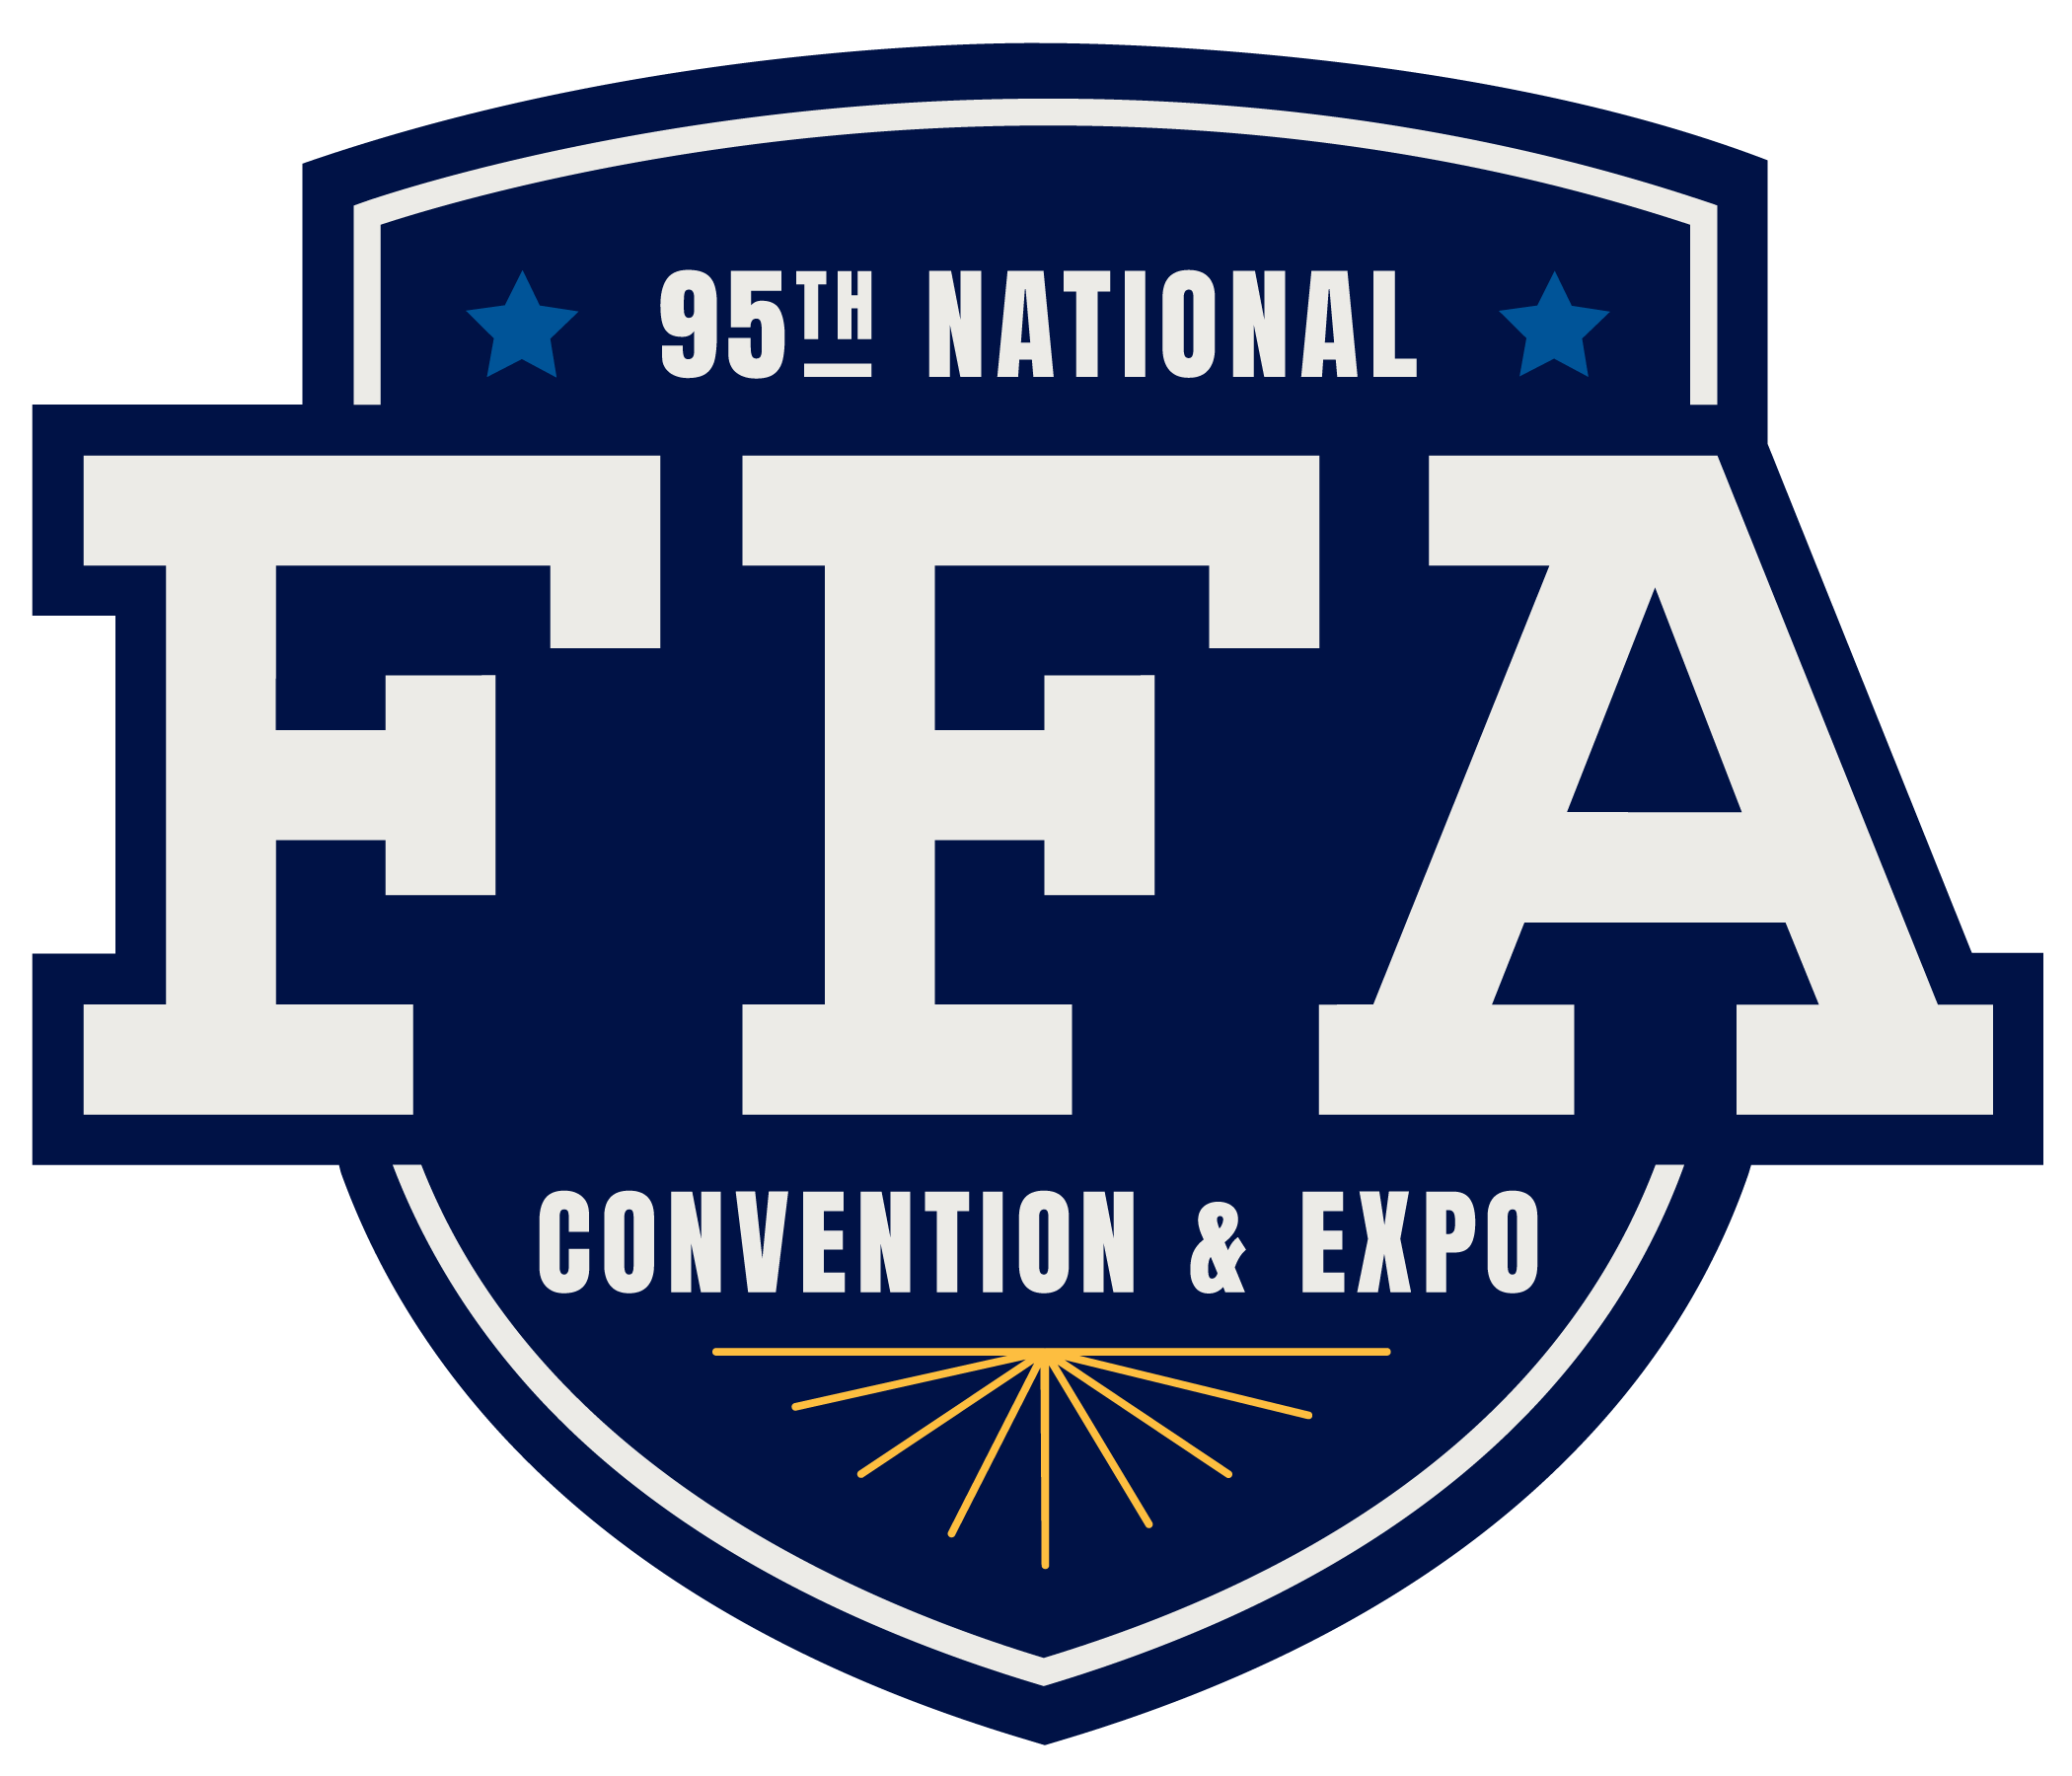 95th National FFA Convention kicks off in Indianapolis